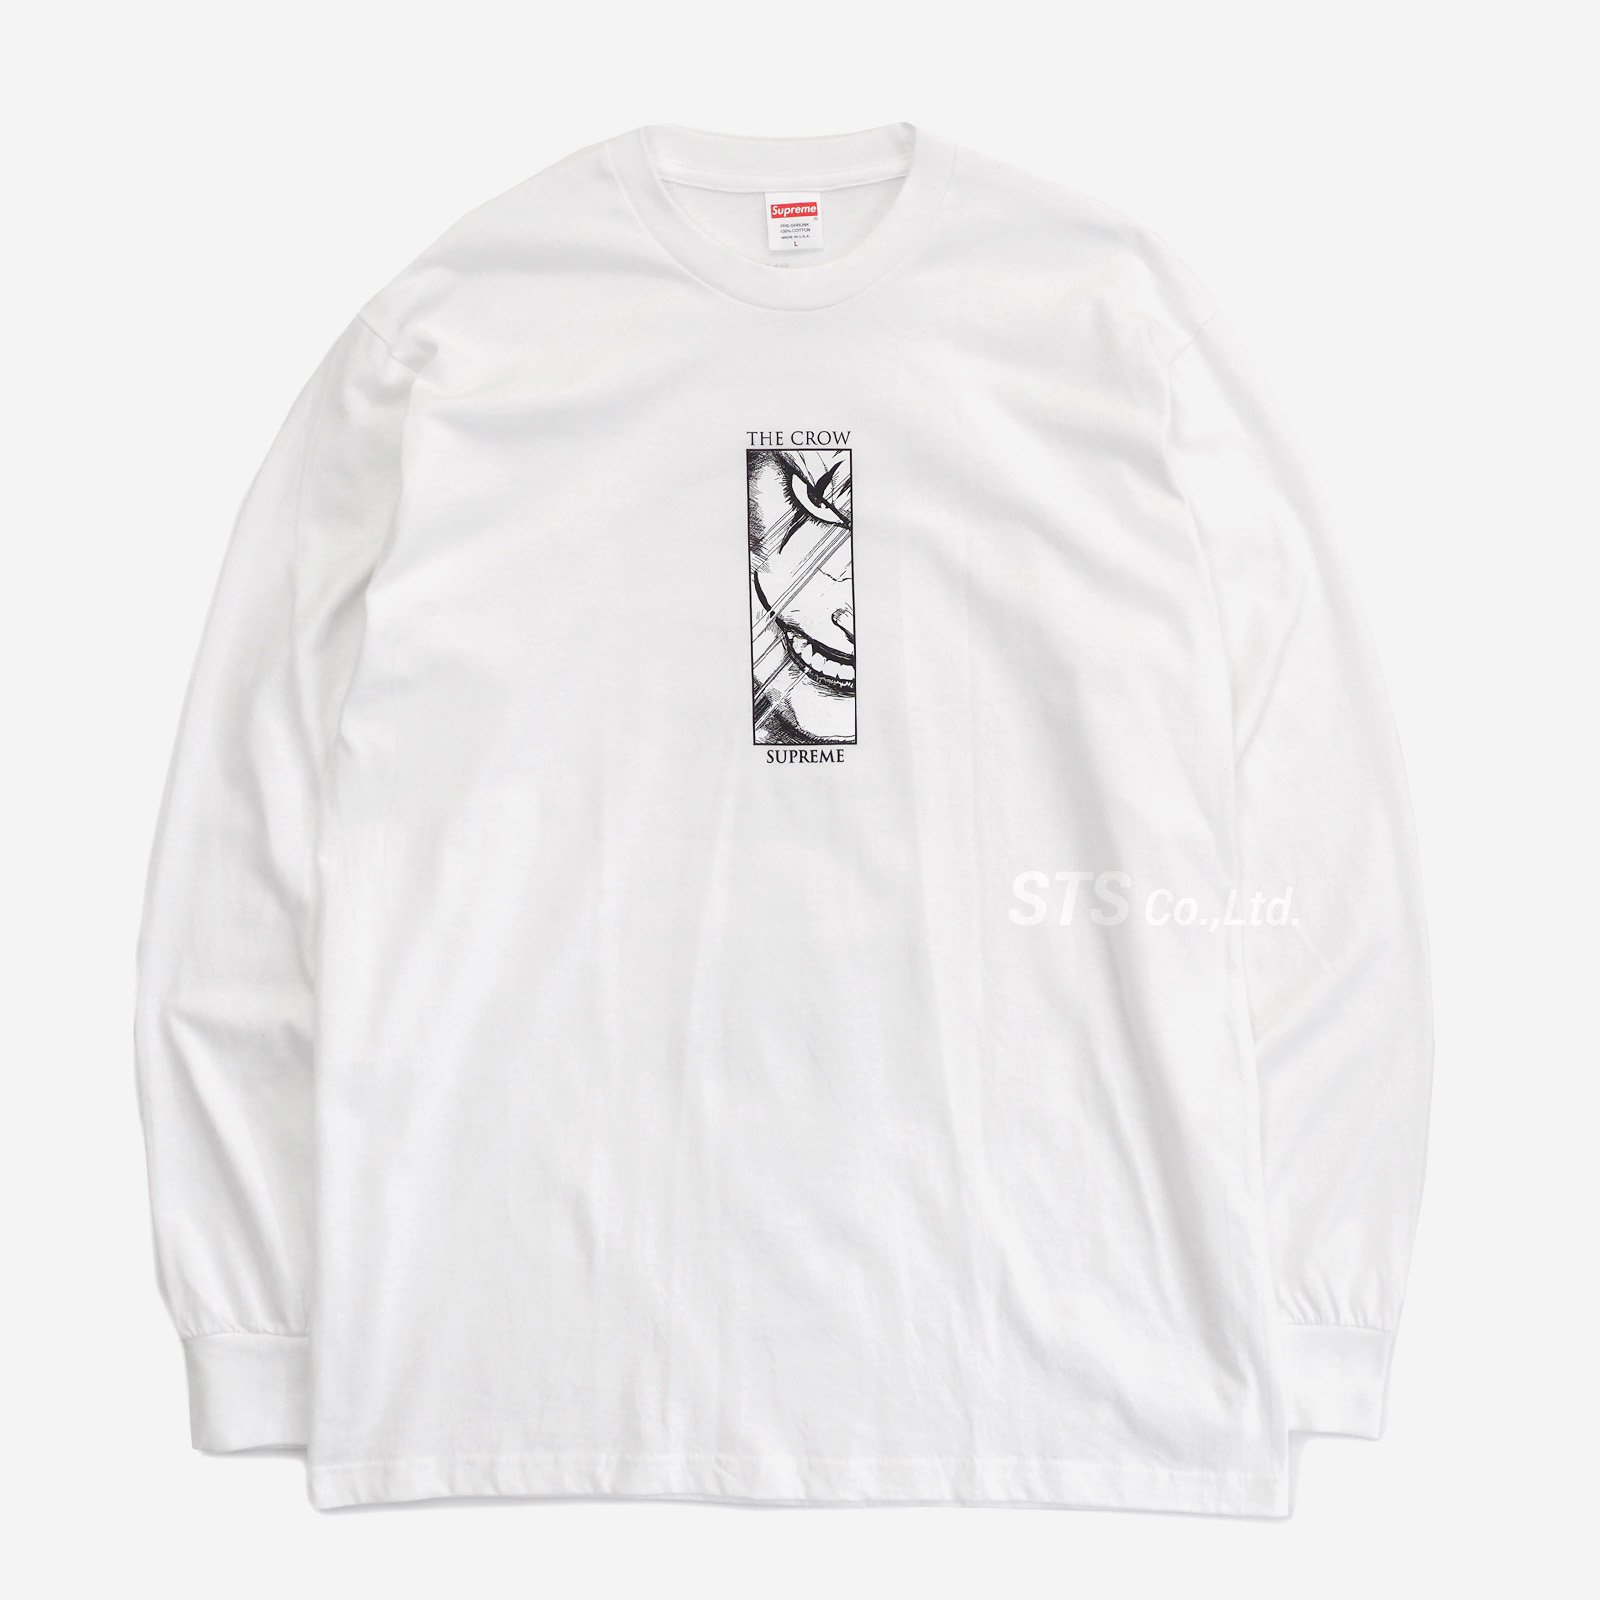 Supreme The Crow L/S Tee white - Tシャツ/カットソー(七分/長袖)